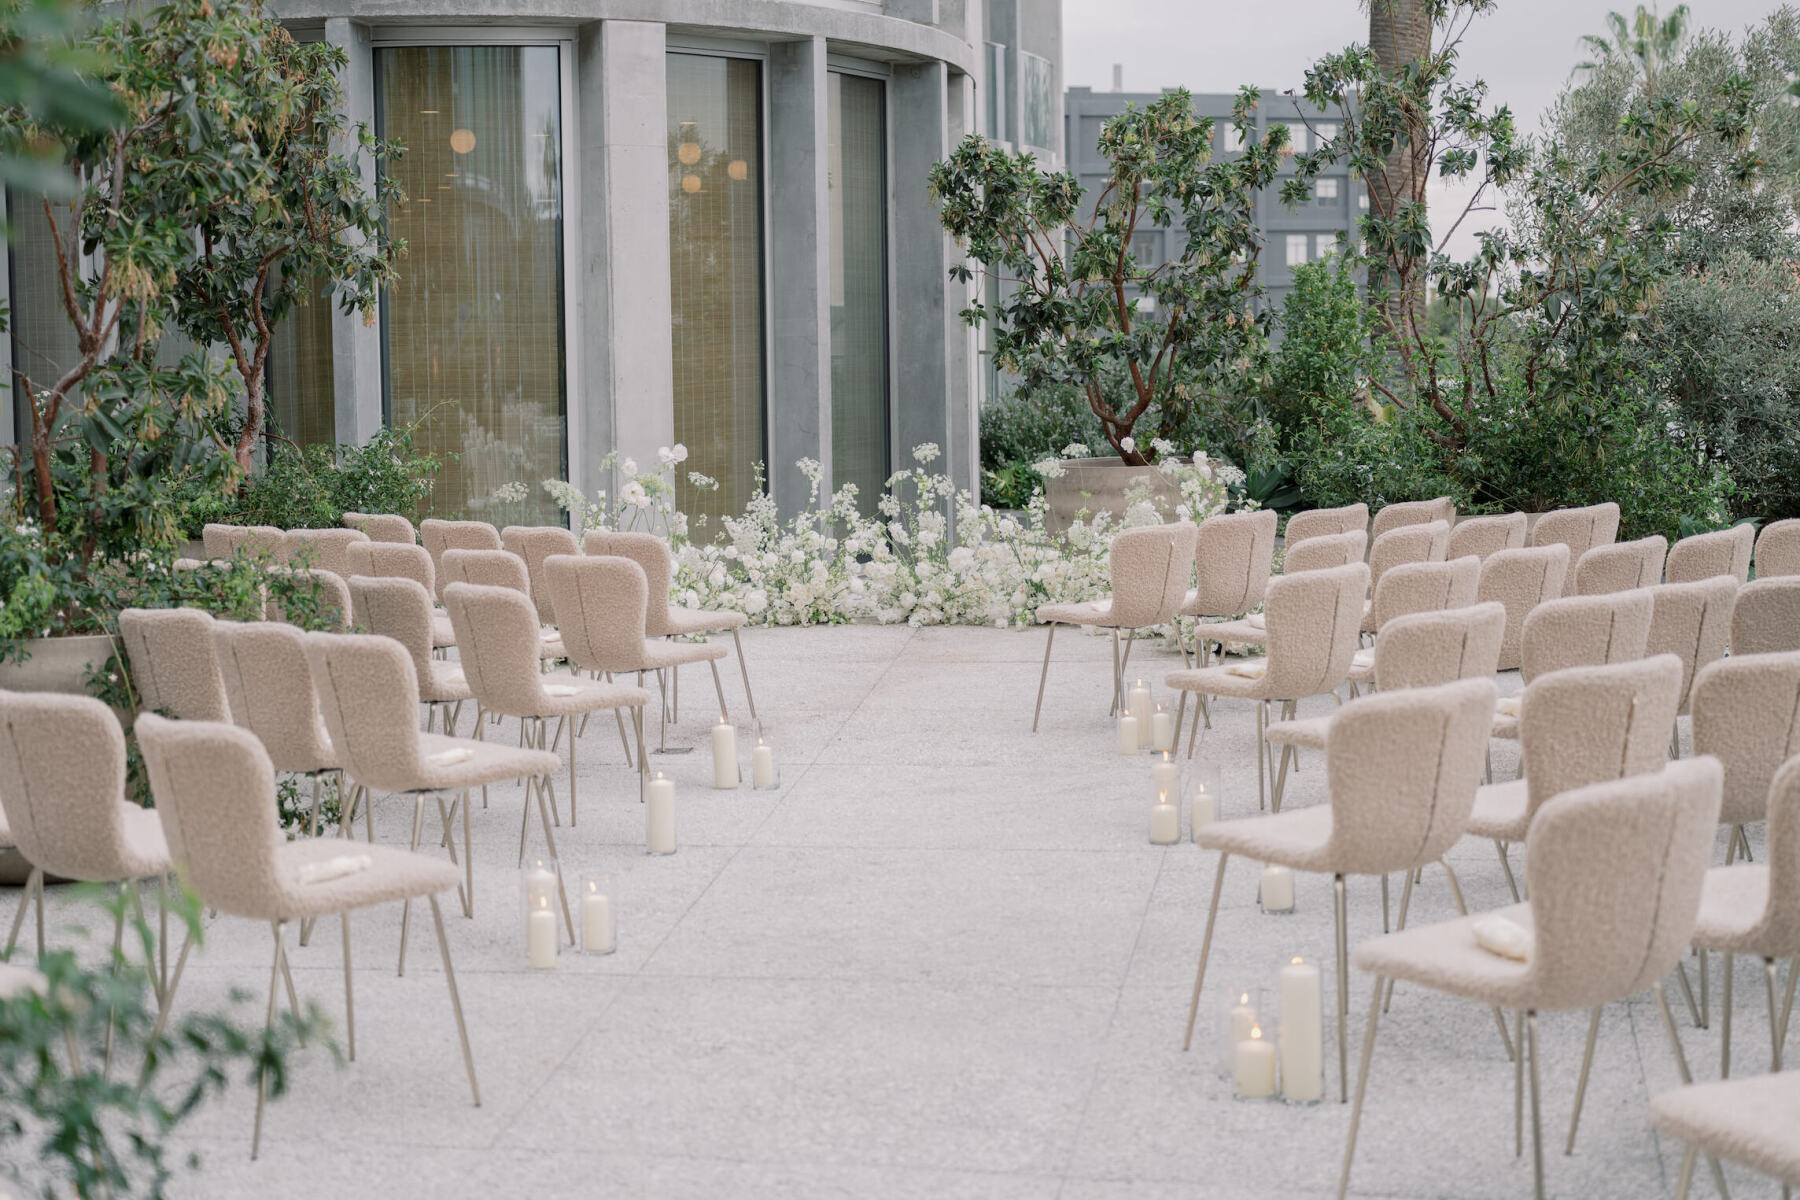 The outdoor ceremony of a modern California wedding featured textured taupe chairs and a low, rounded floral installation to delineate where the couple and their officiant would stand.